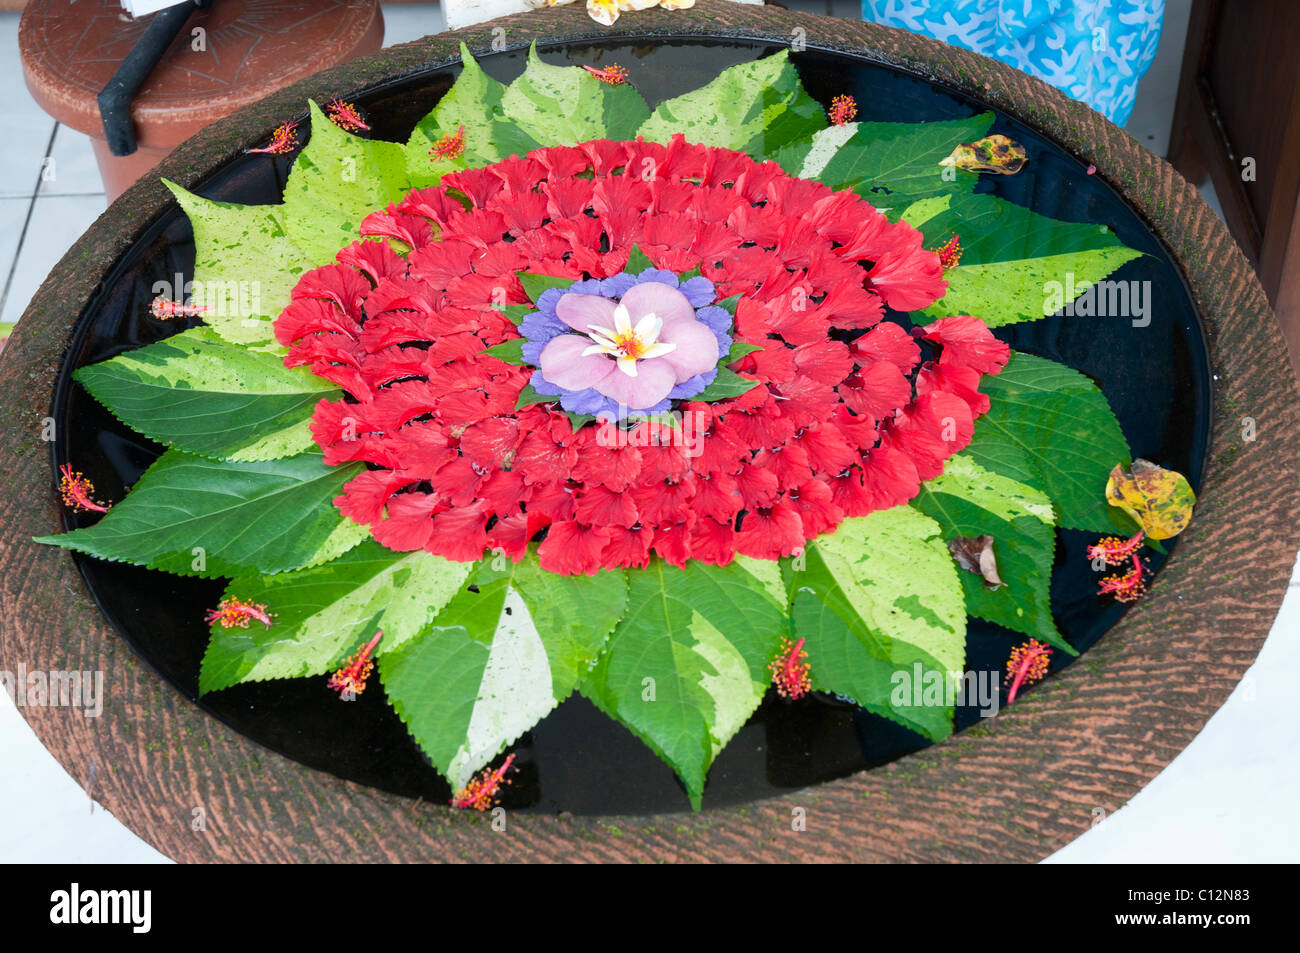 Delicate arrangement of petals and leaves floating in a basin of water outside a shop in Ubud, Bali, Indonesia Stock Photo